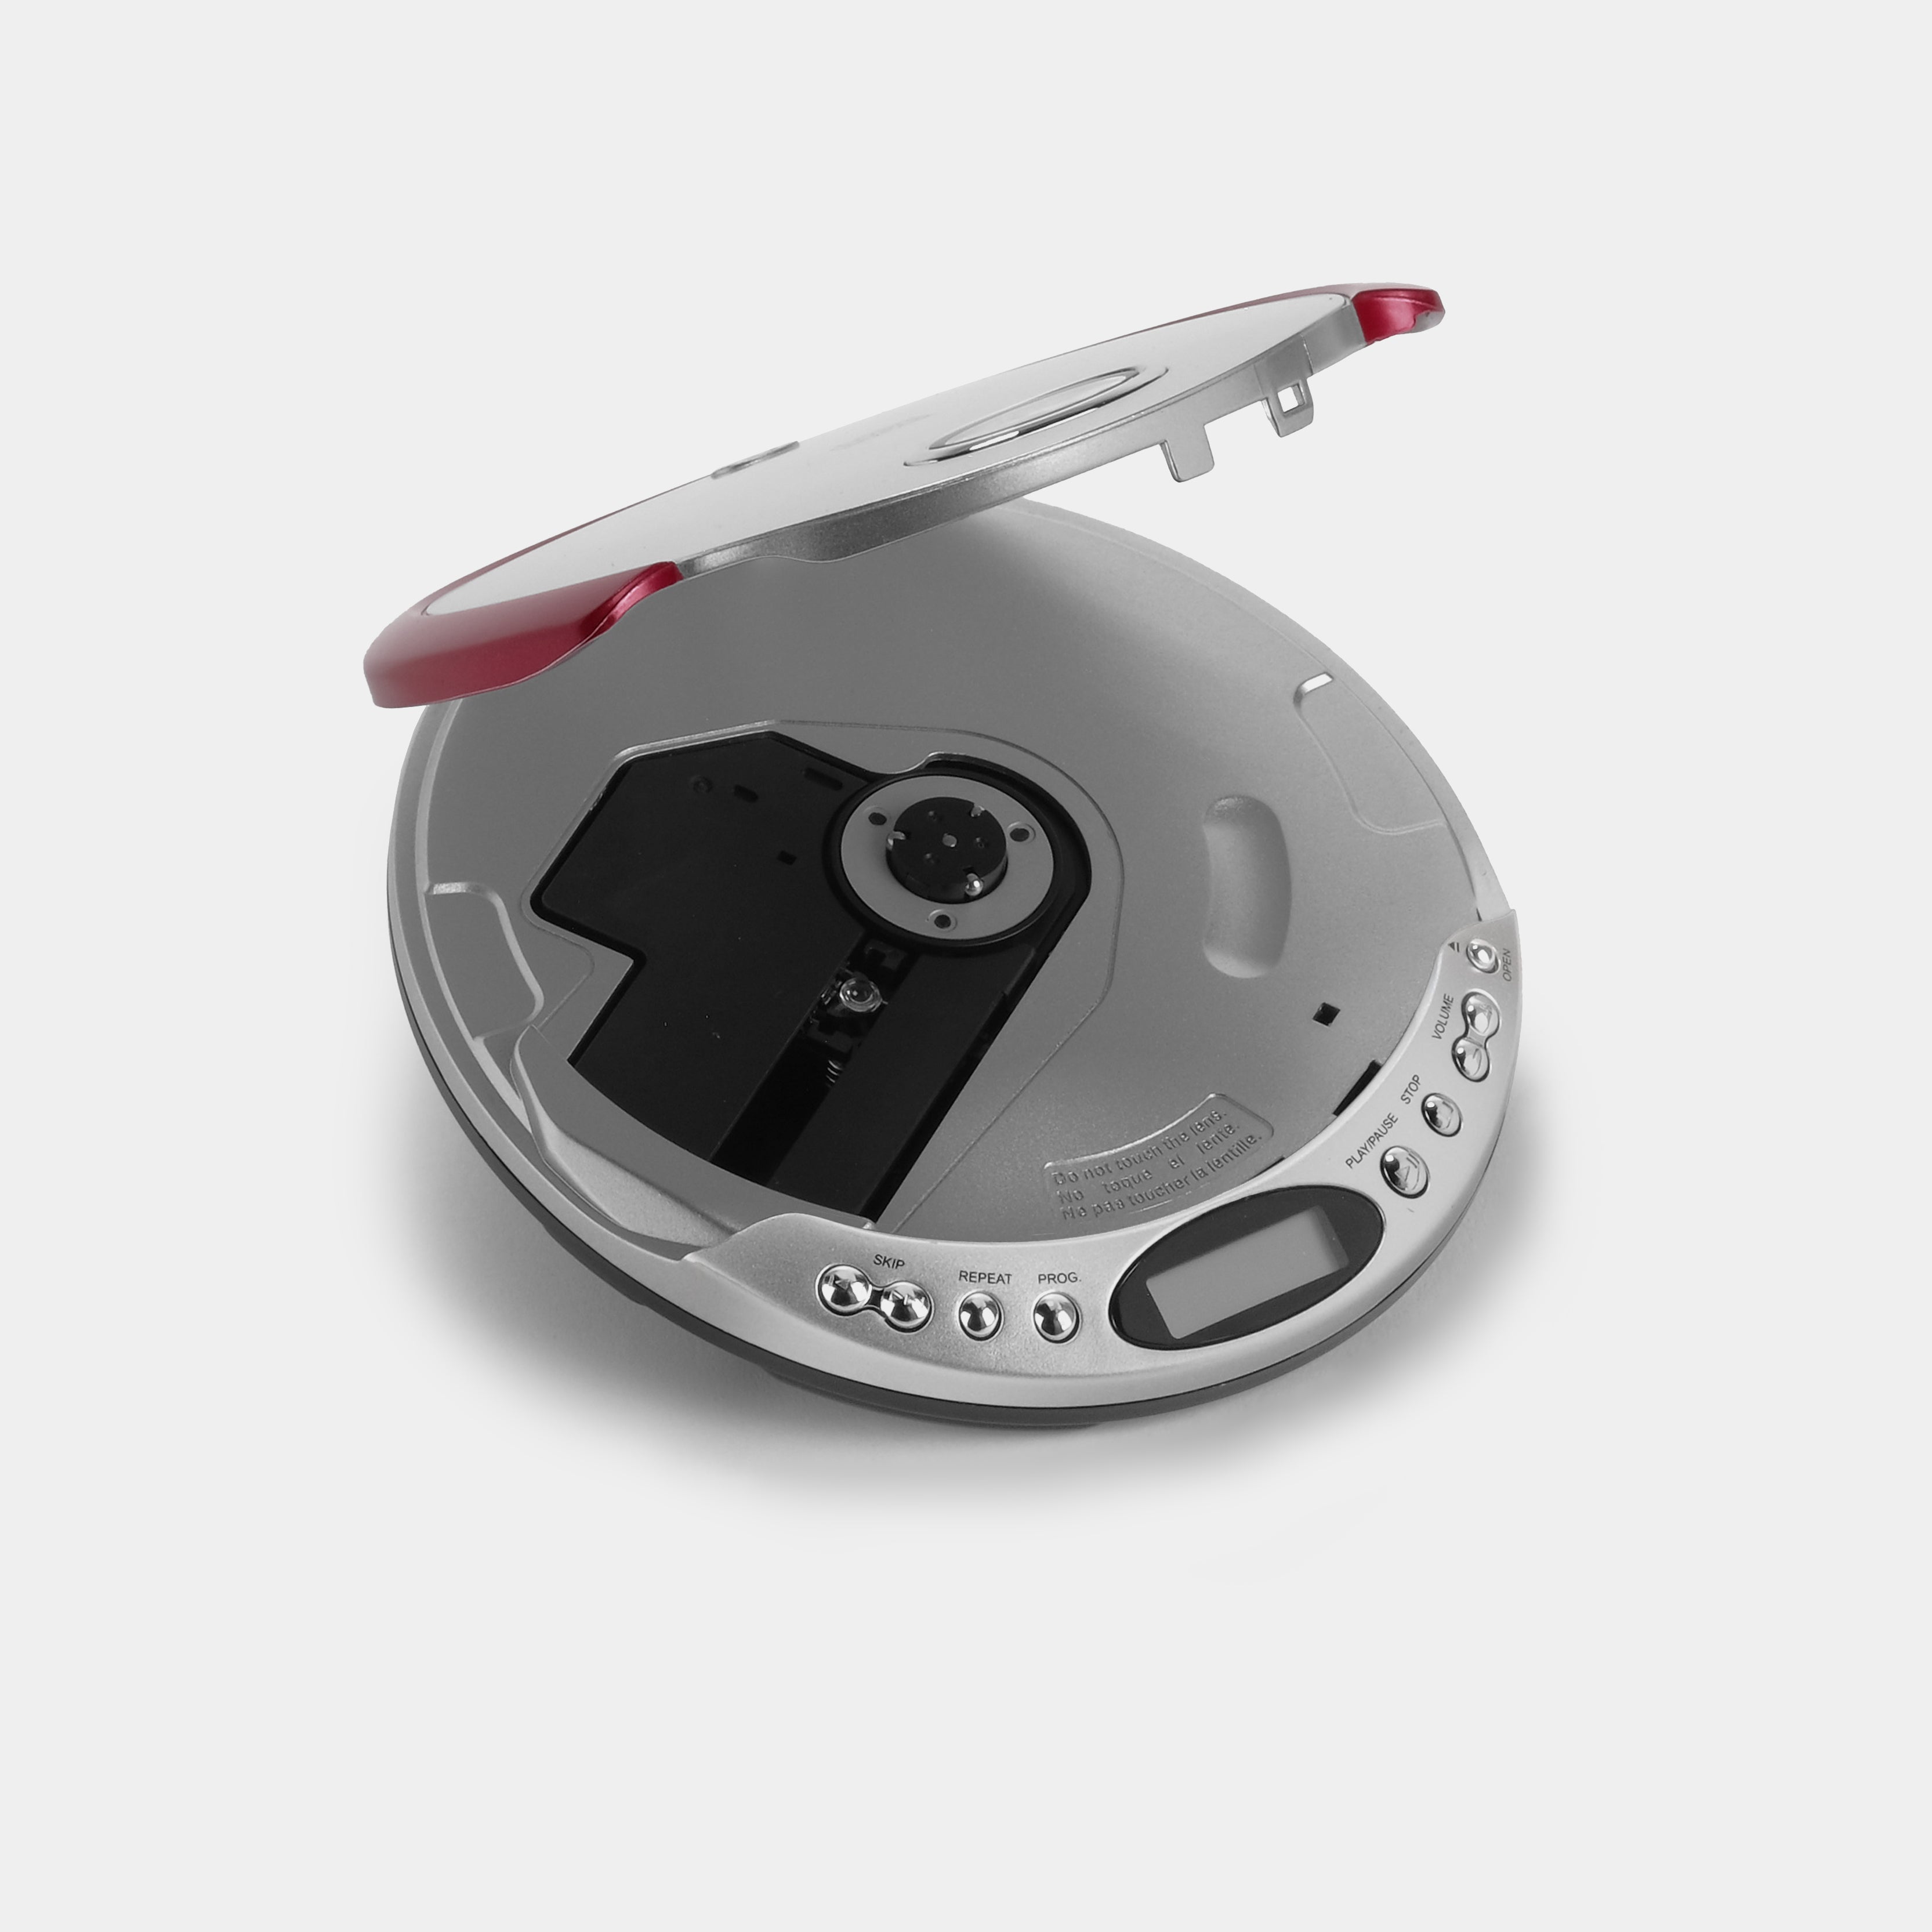 Durabrand CD-566 Silver and Red Portable CD Player